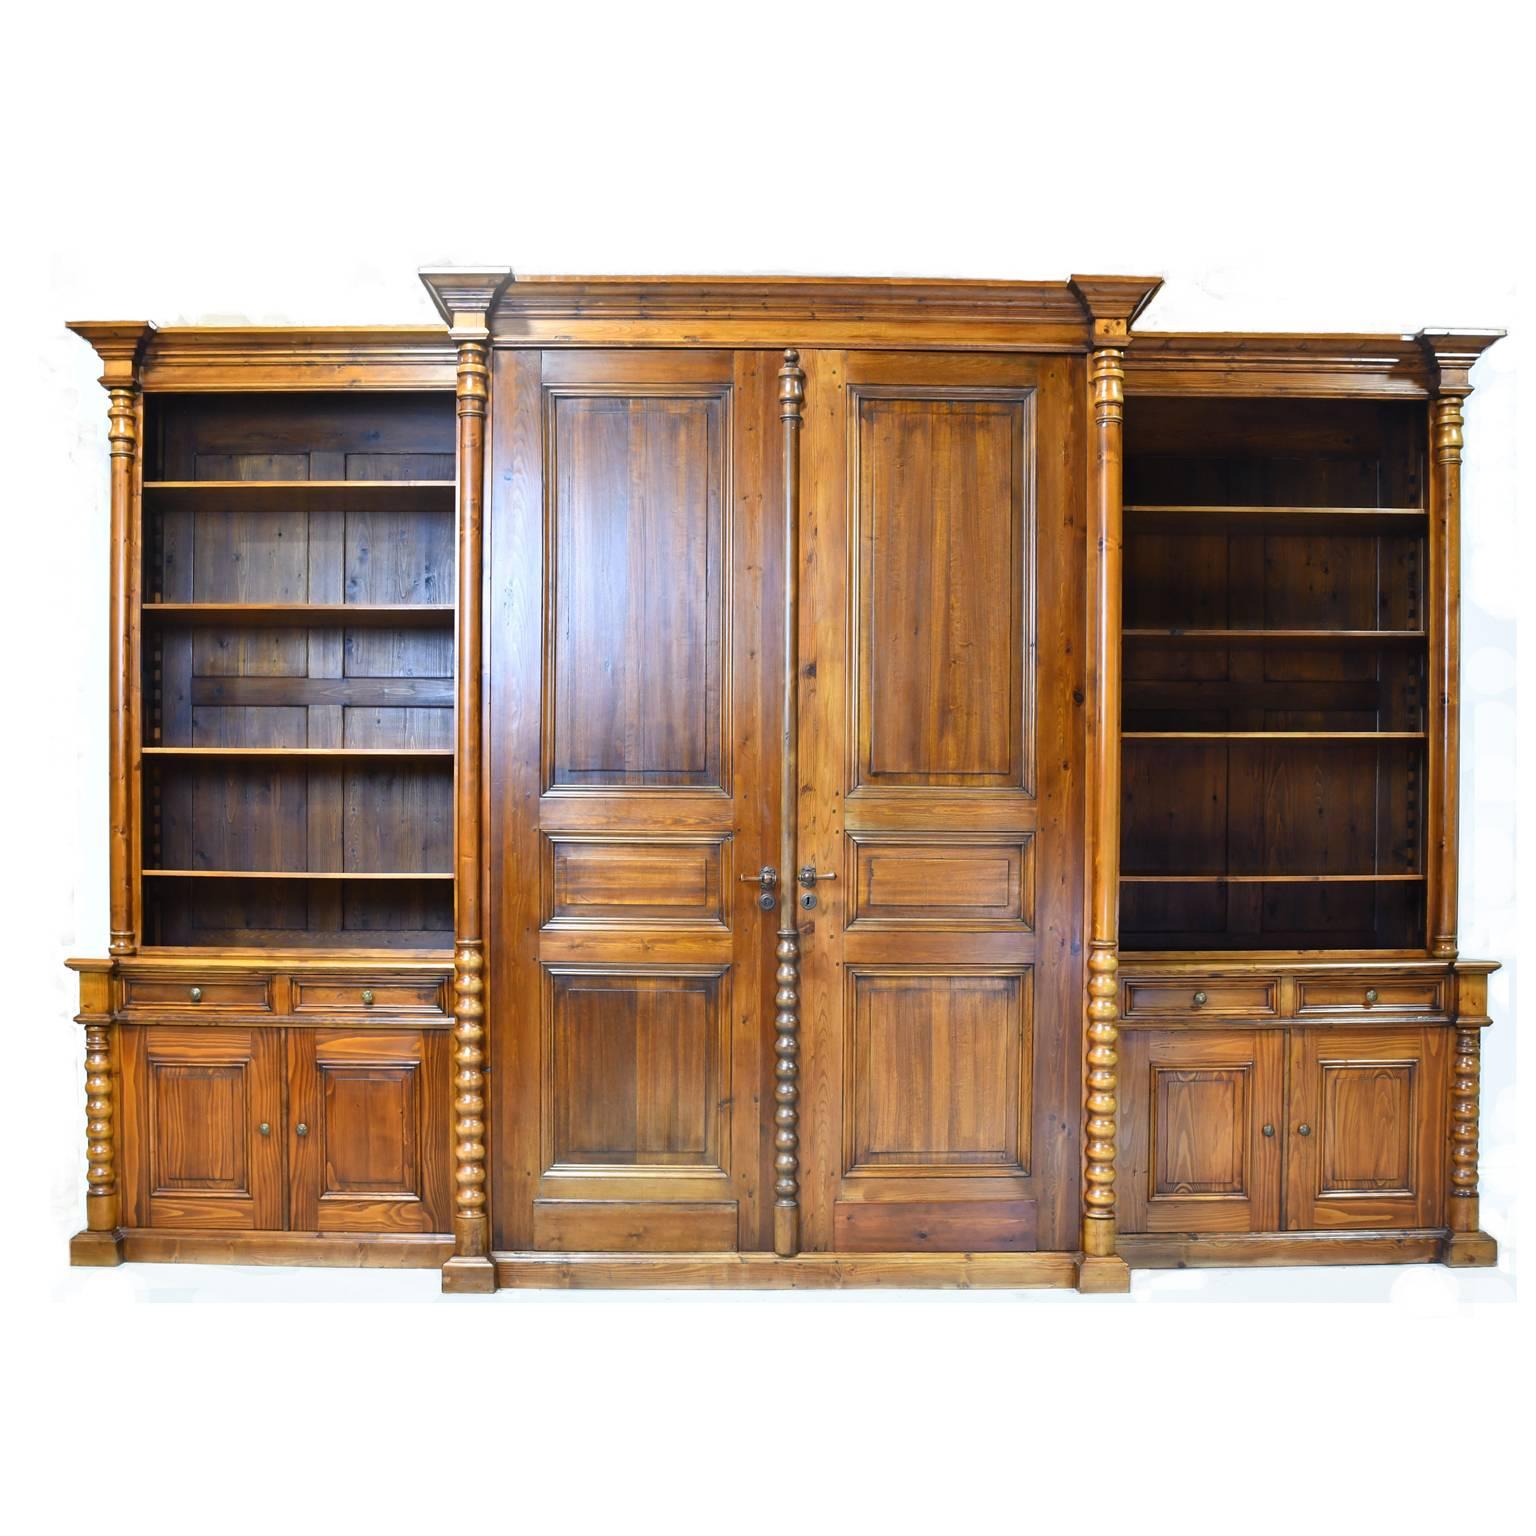 This handsome and massive wall unit was designed & built in our workshop 15 years ago using antique doors and other elements, along with pine that was re-purposed from old Dutch Gouda cheese boards. The antique center doors are retractable, and